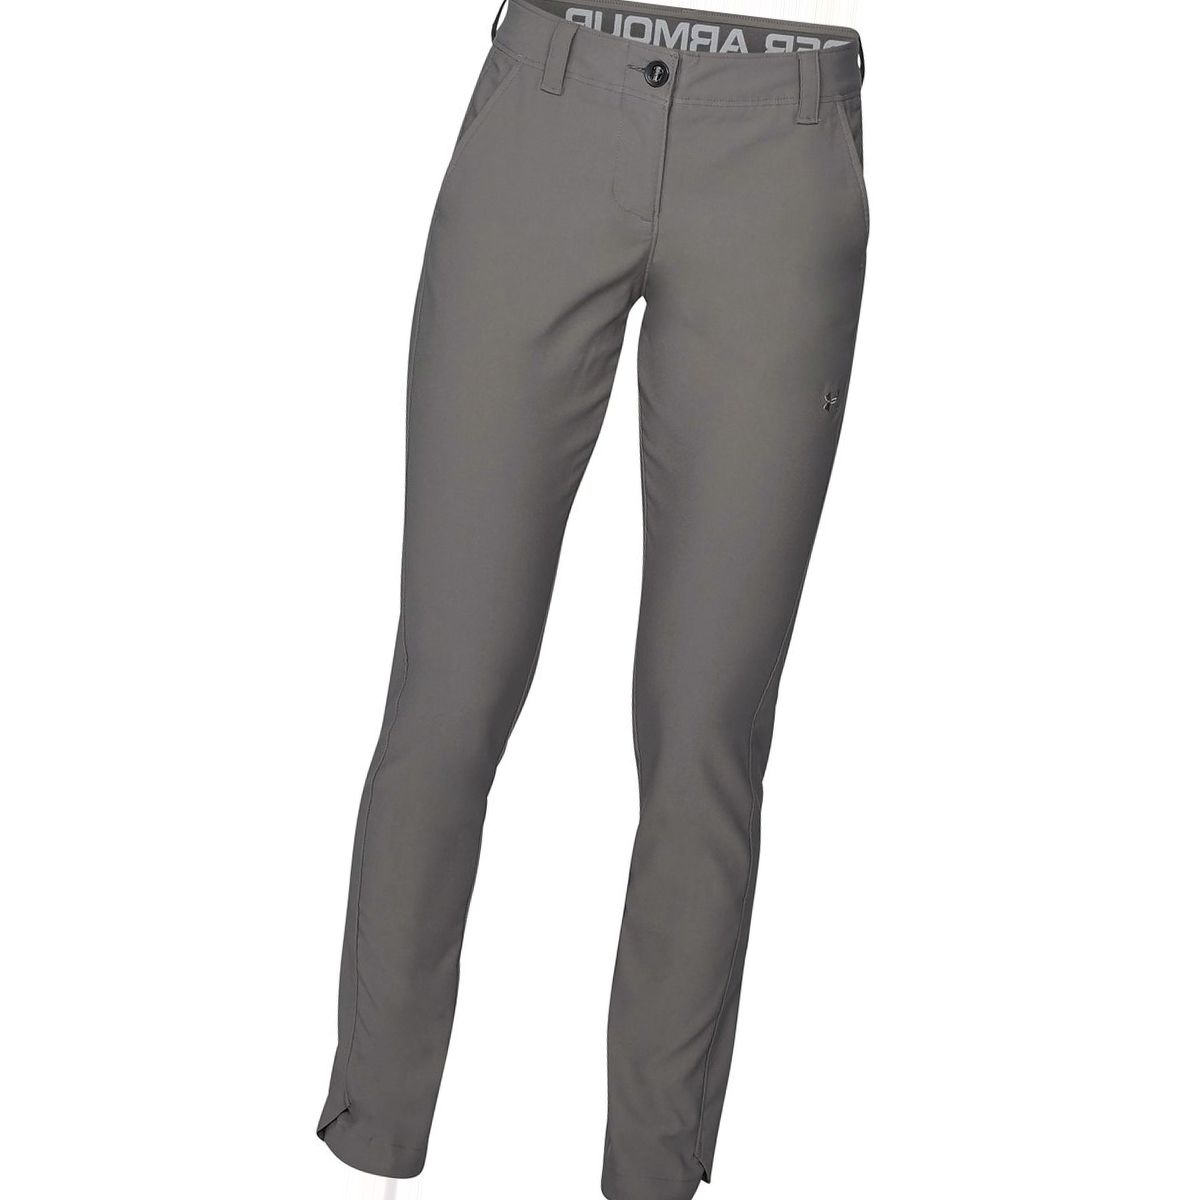 Under Armour Inlet Fishing Pant - Women's